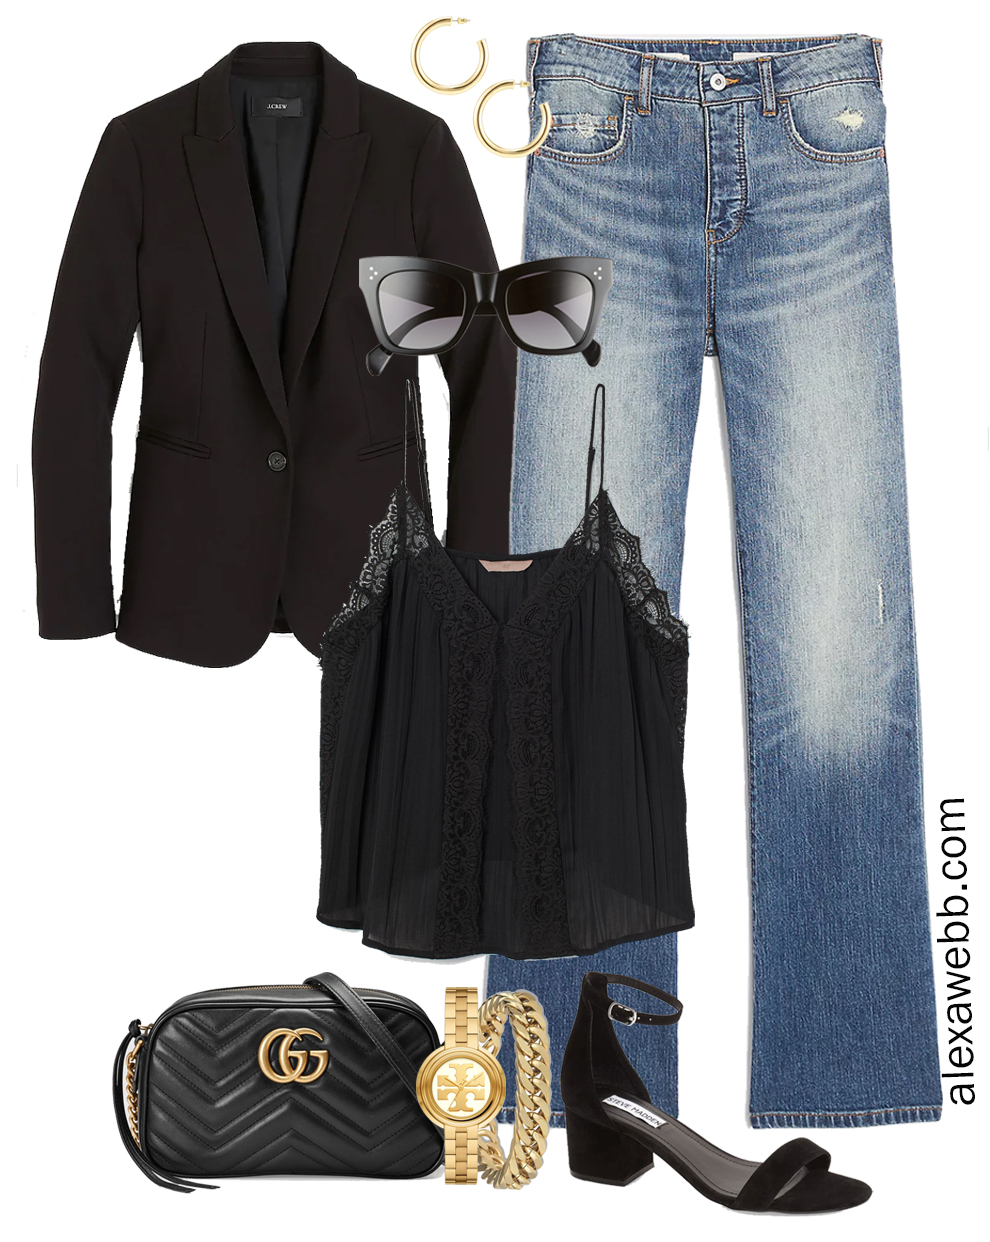 Fall outfit idea with long blazer, black lace camisole and Saint